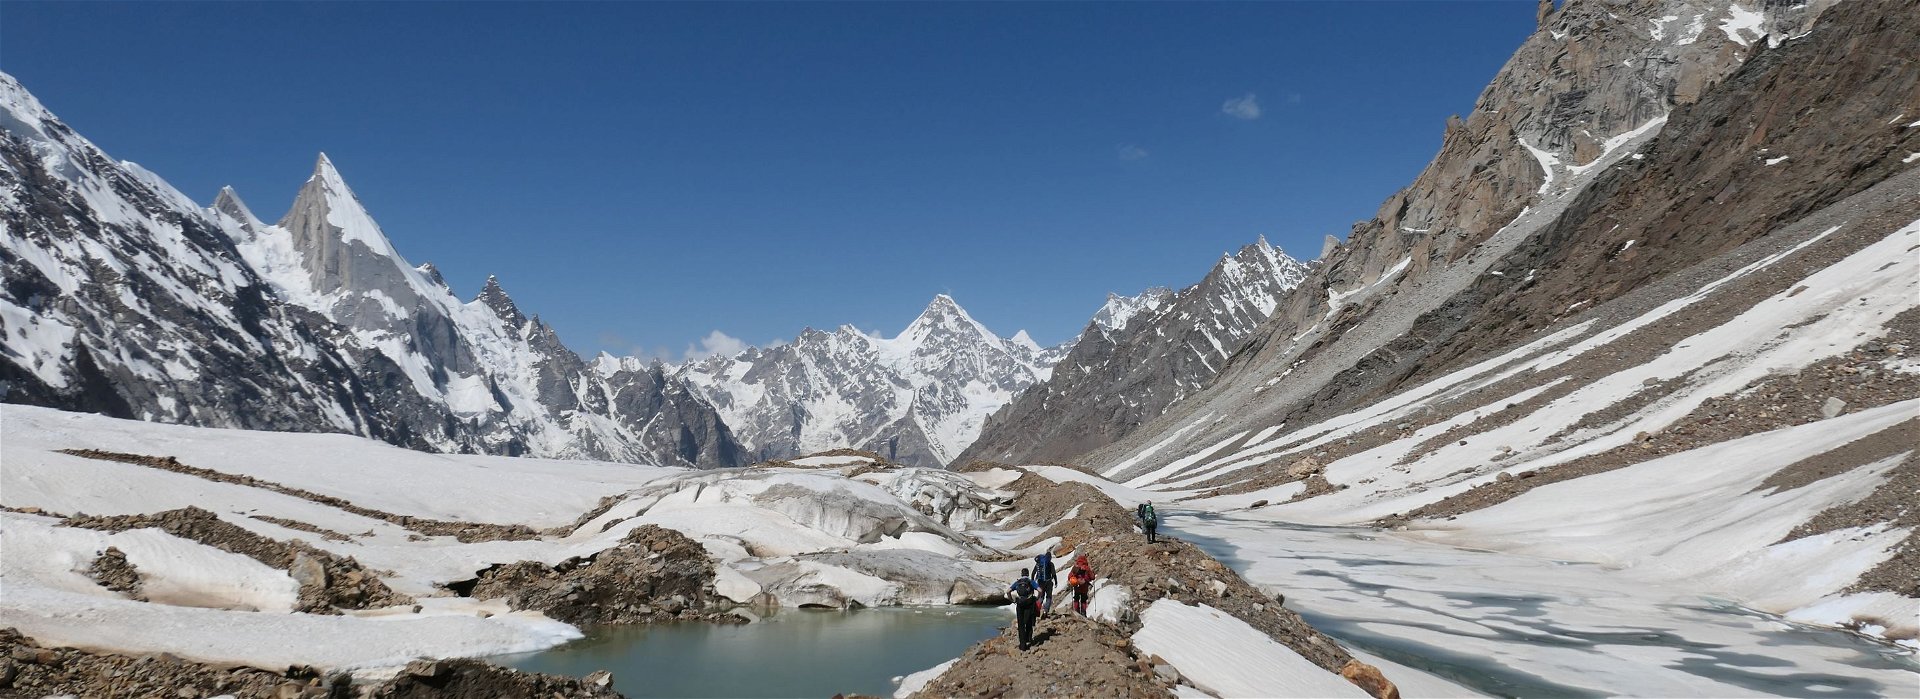 Back to our roots: trekking in Pakistan